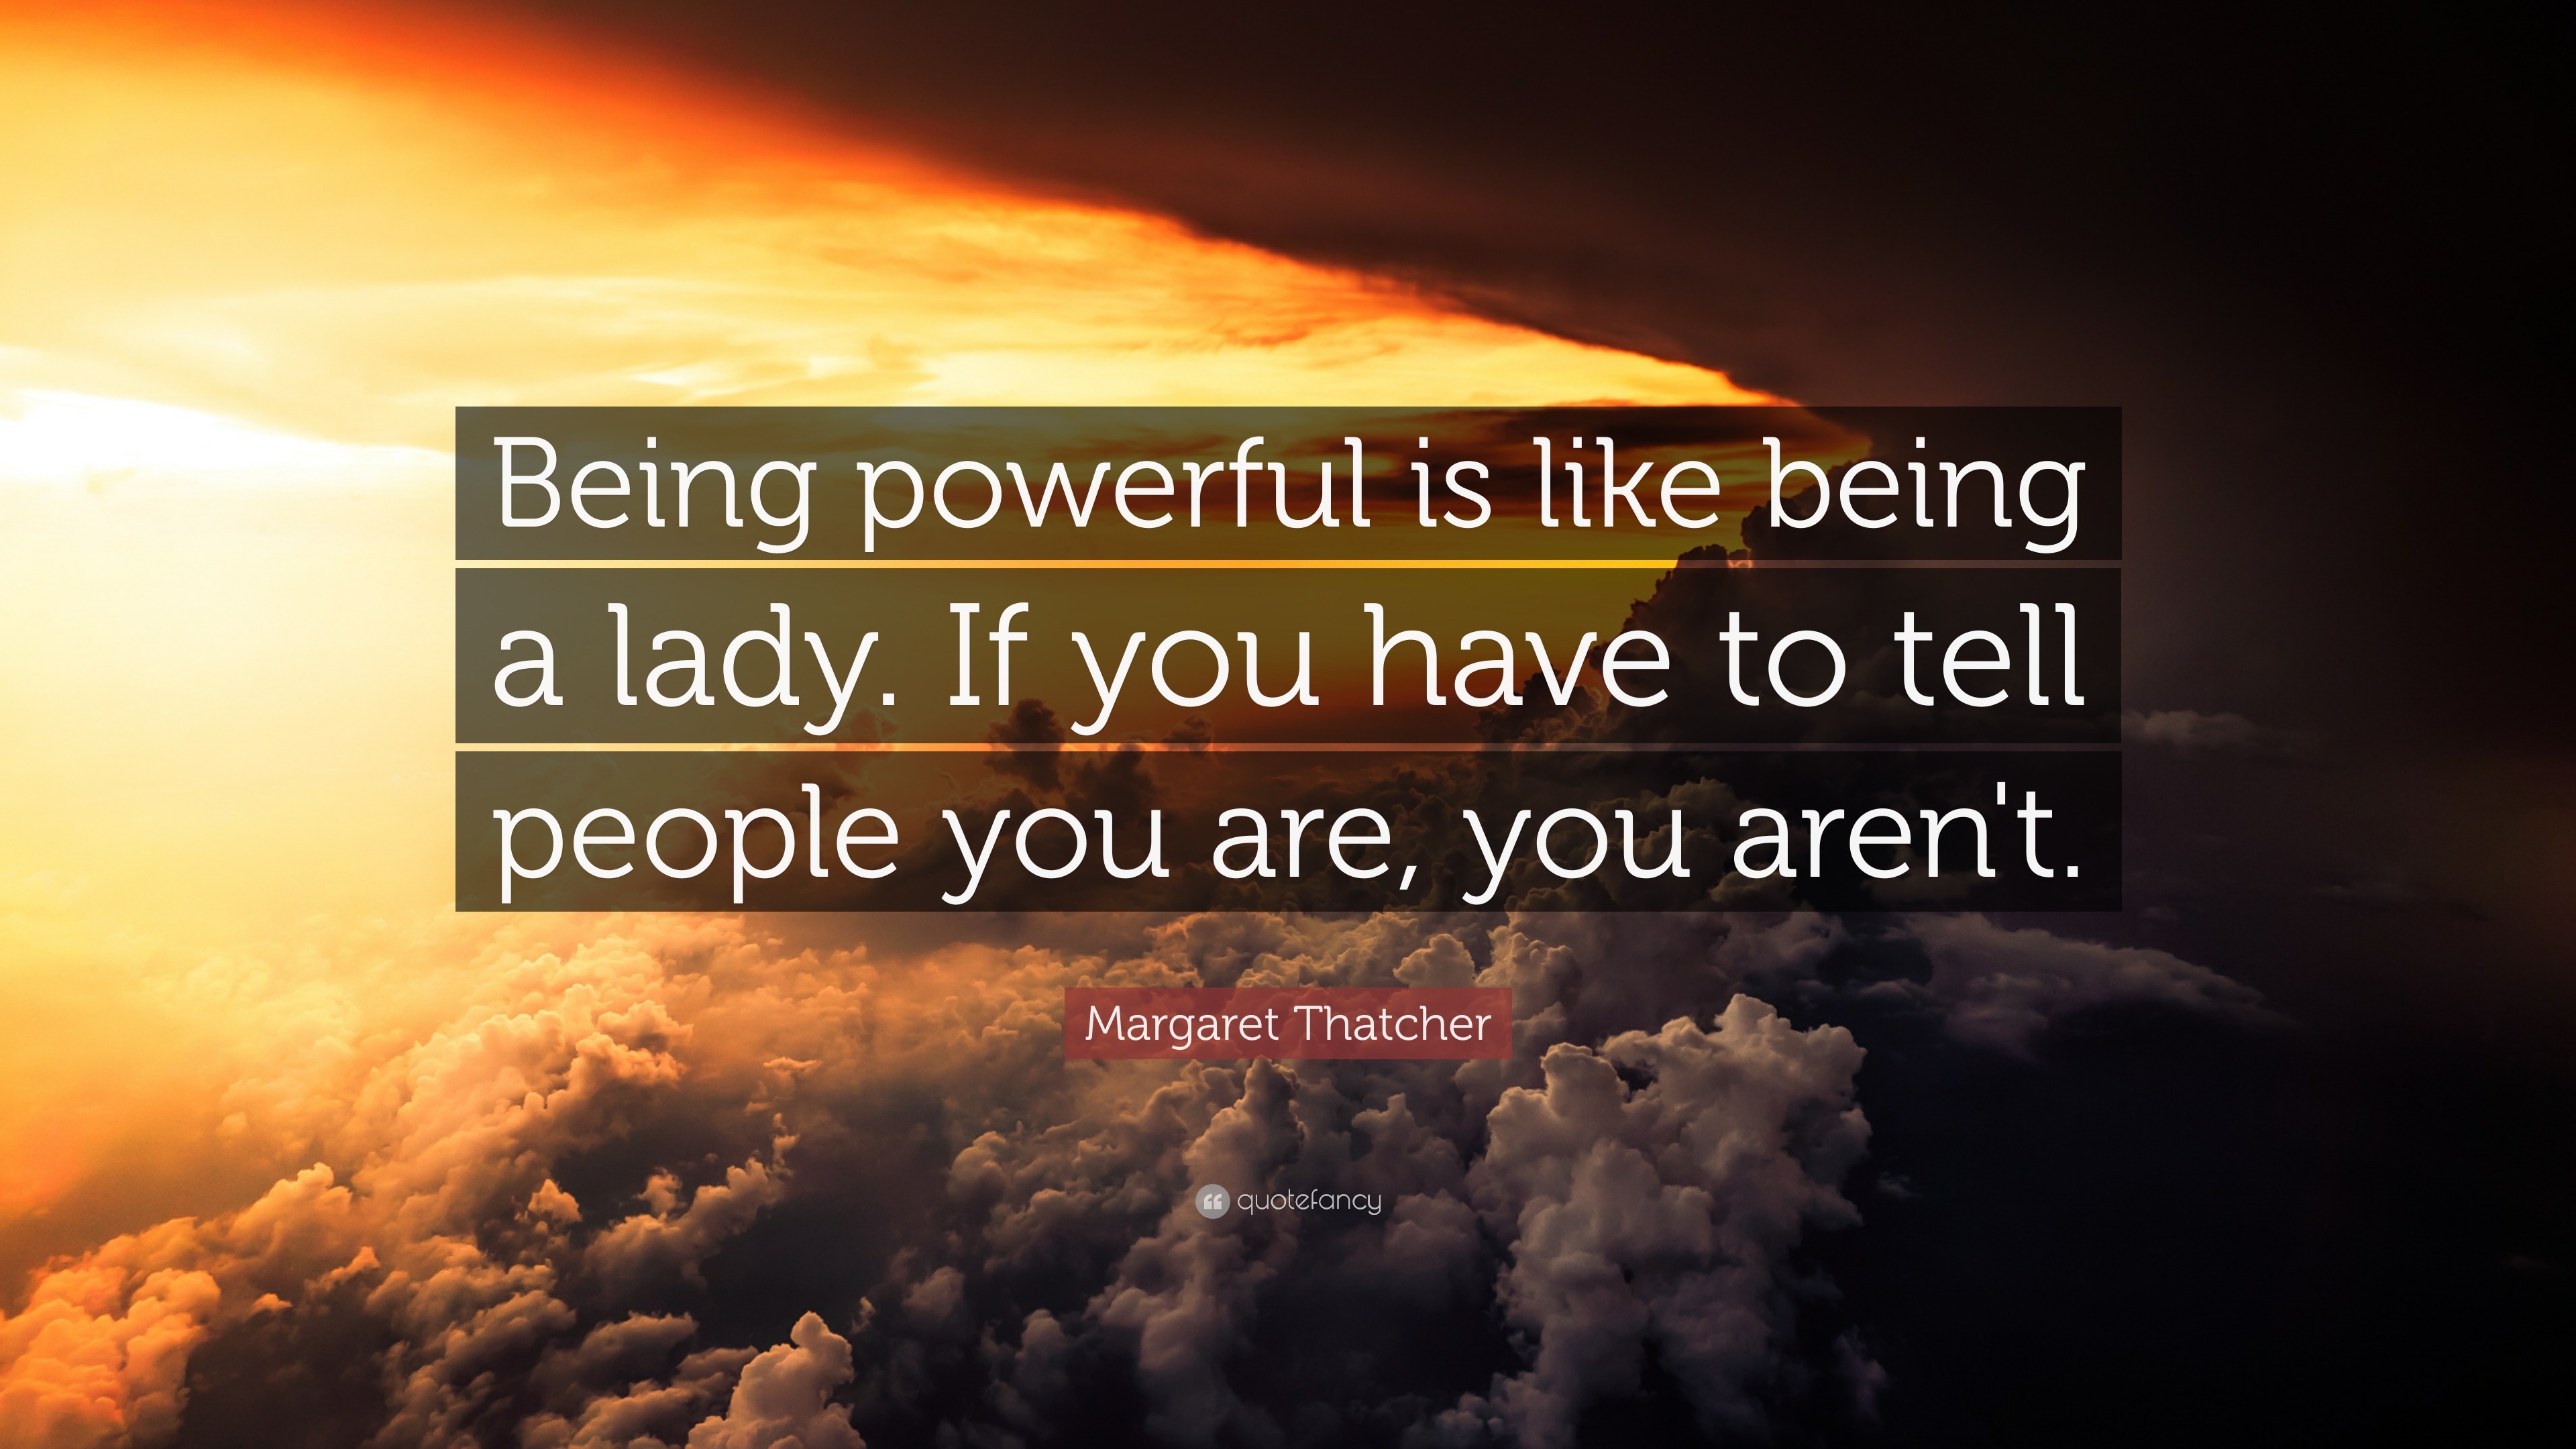 Margaret Thatcher Quote “being Powerful Is Like Being A